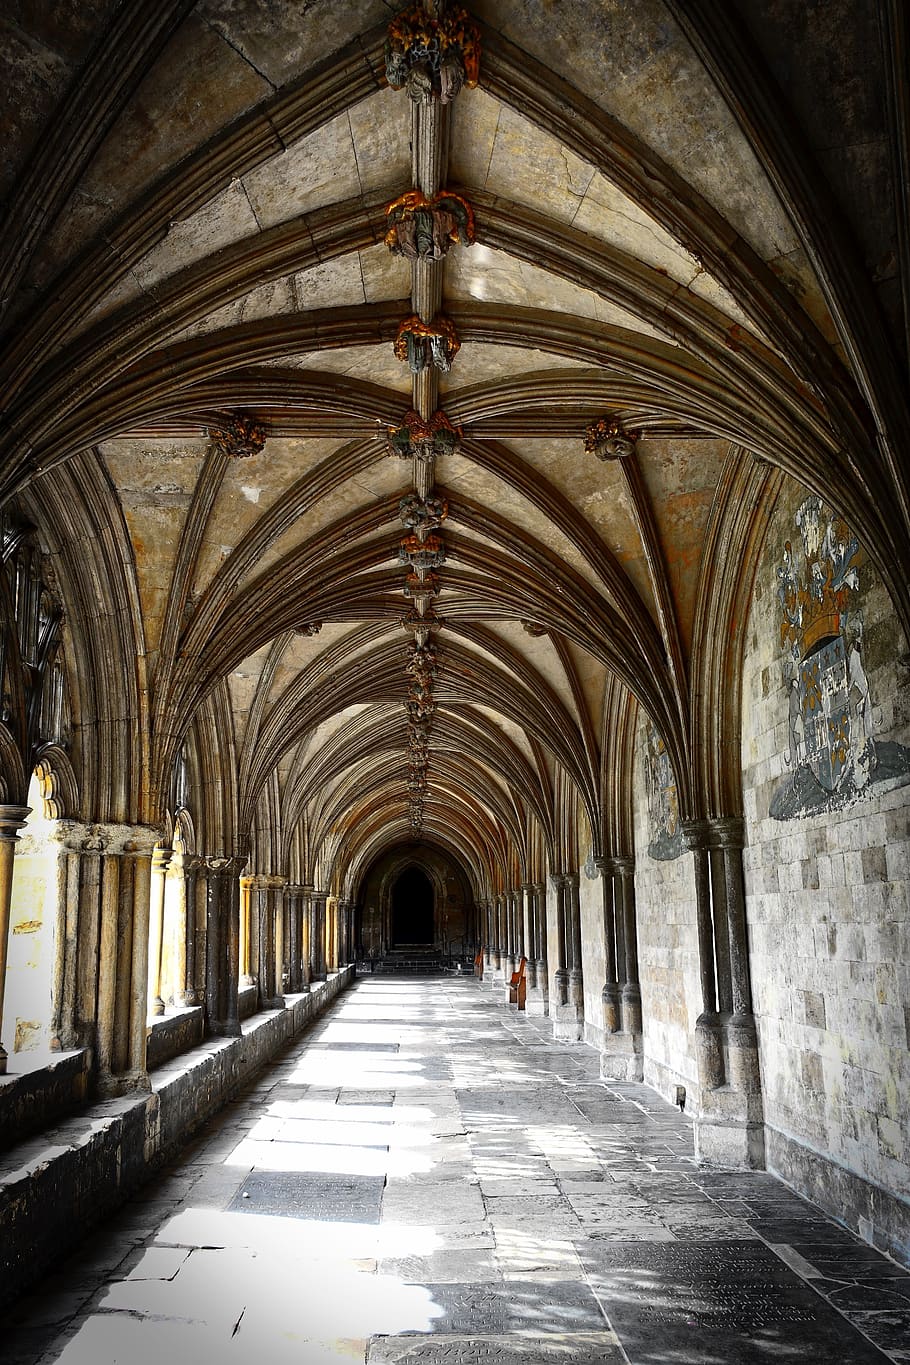 norwich cathedral, cloisters, cathedral, medieval, courtyard, architectural, building, religion, arch, architecture